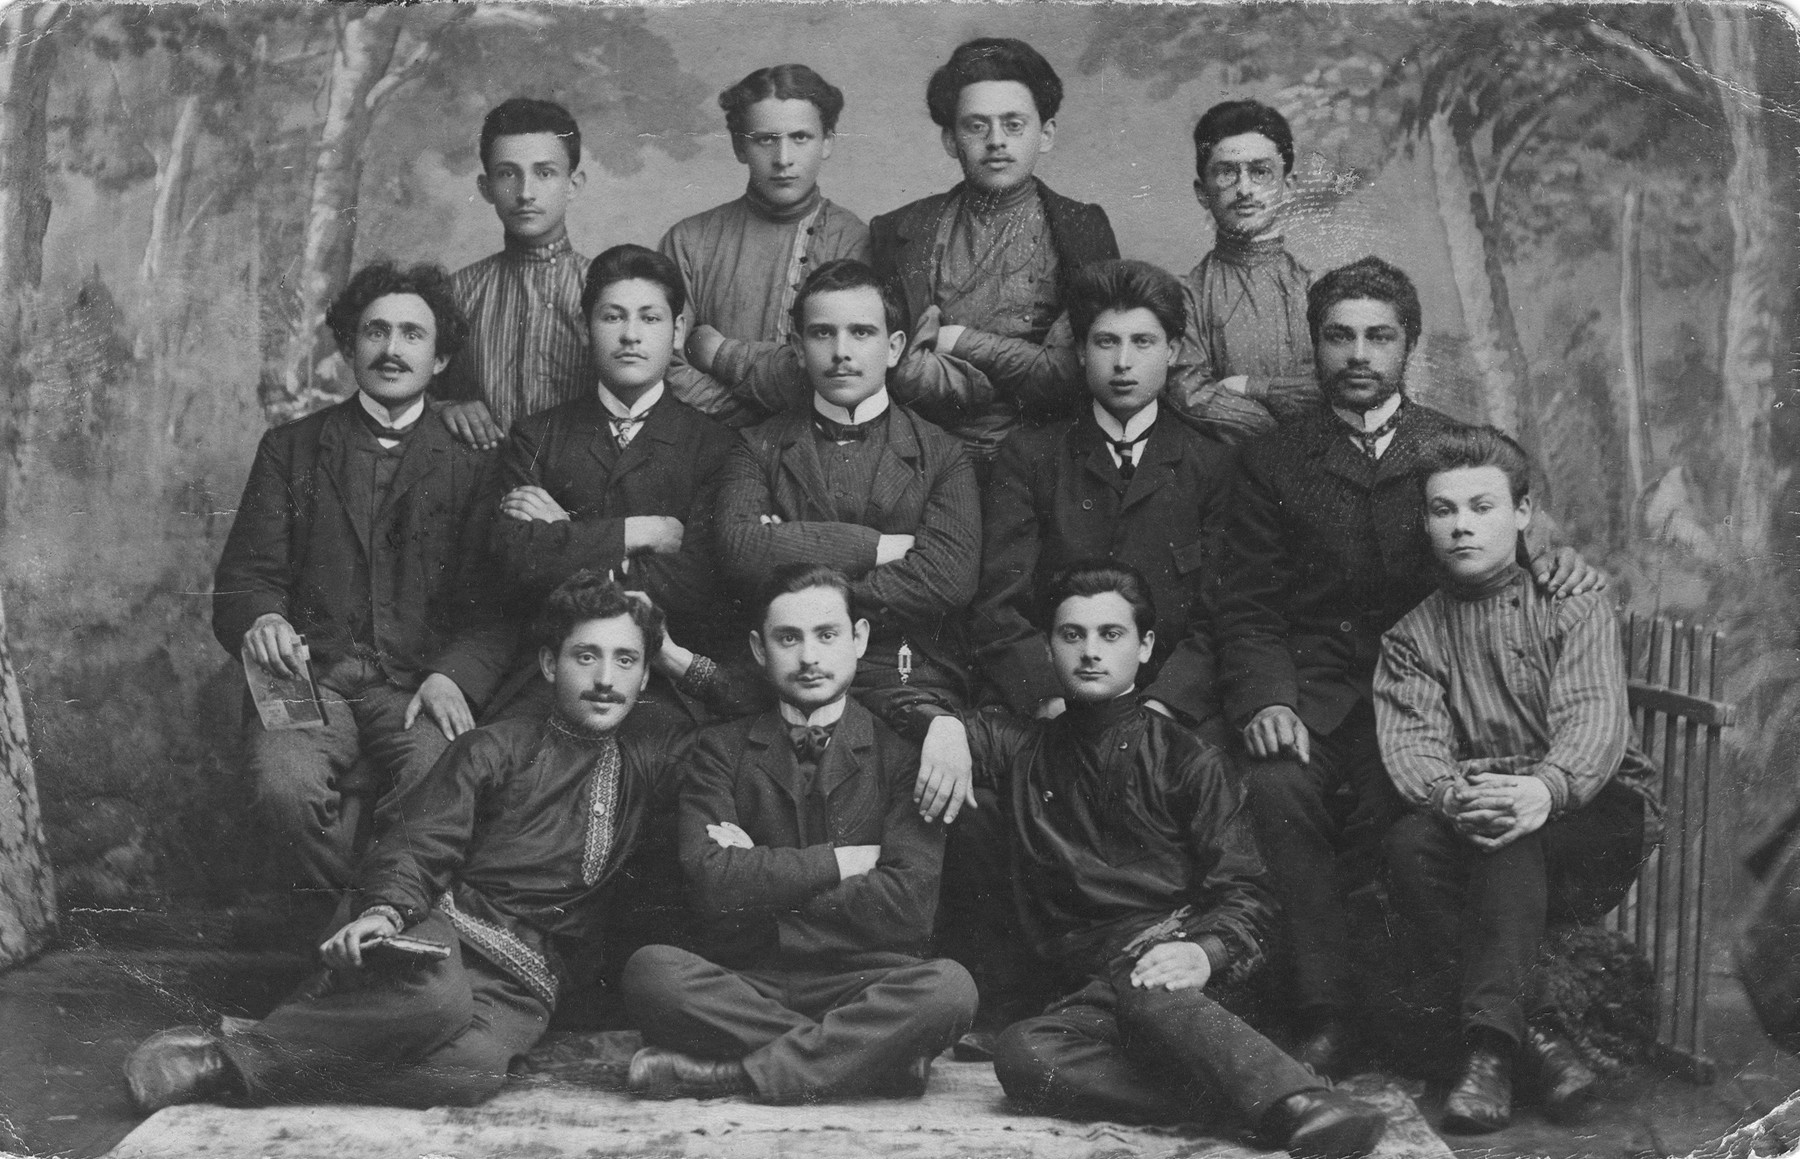 Studio portrait of a group young Jewish men taken in the early 1900s.

Benzion Bloch is seated in the middle of the front row.